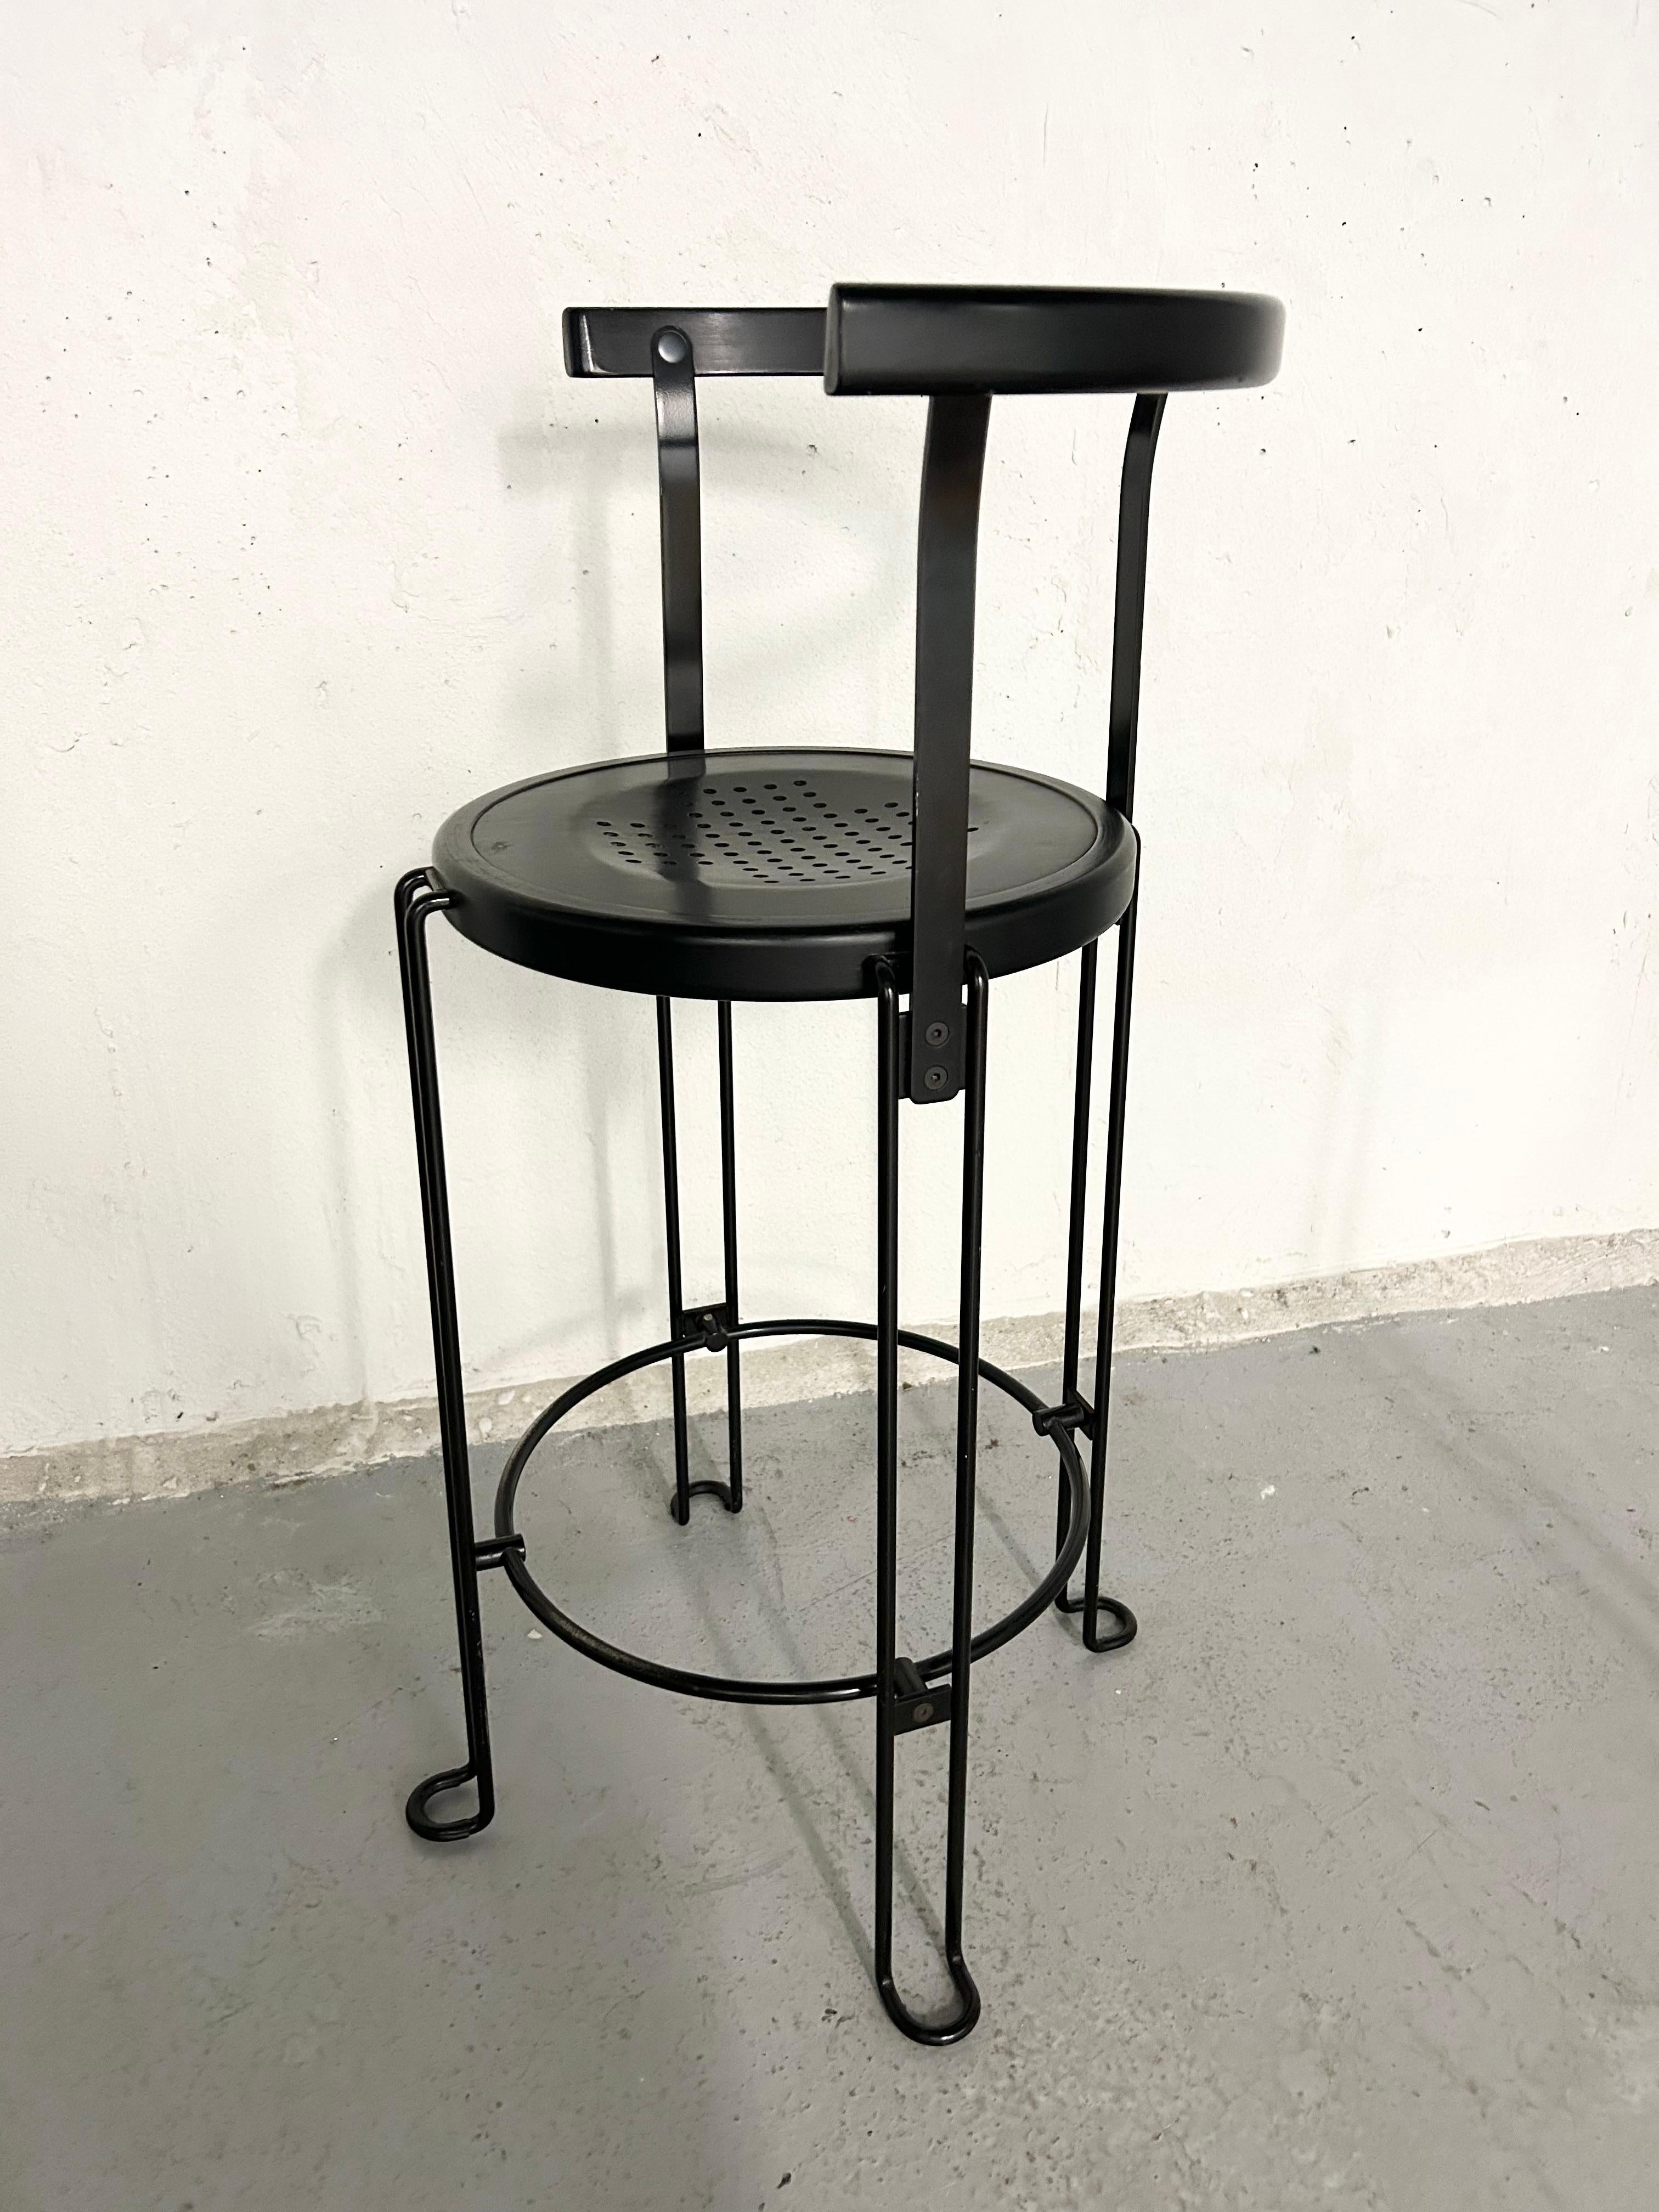 Borge Lindau for Bla Station Sweden, 1986 B4-65 Counter Height Stool 2